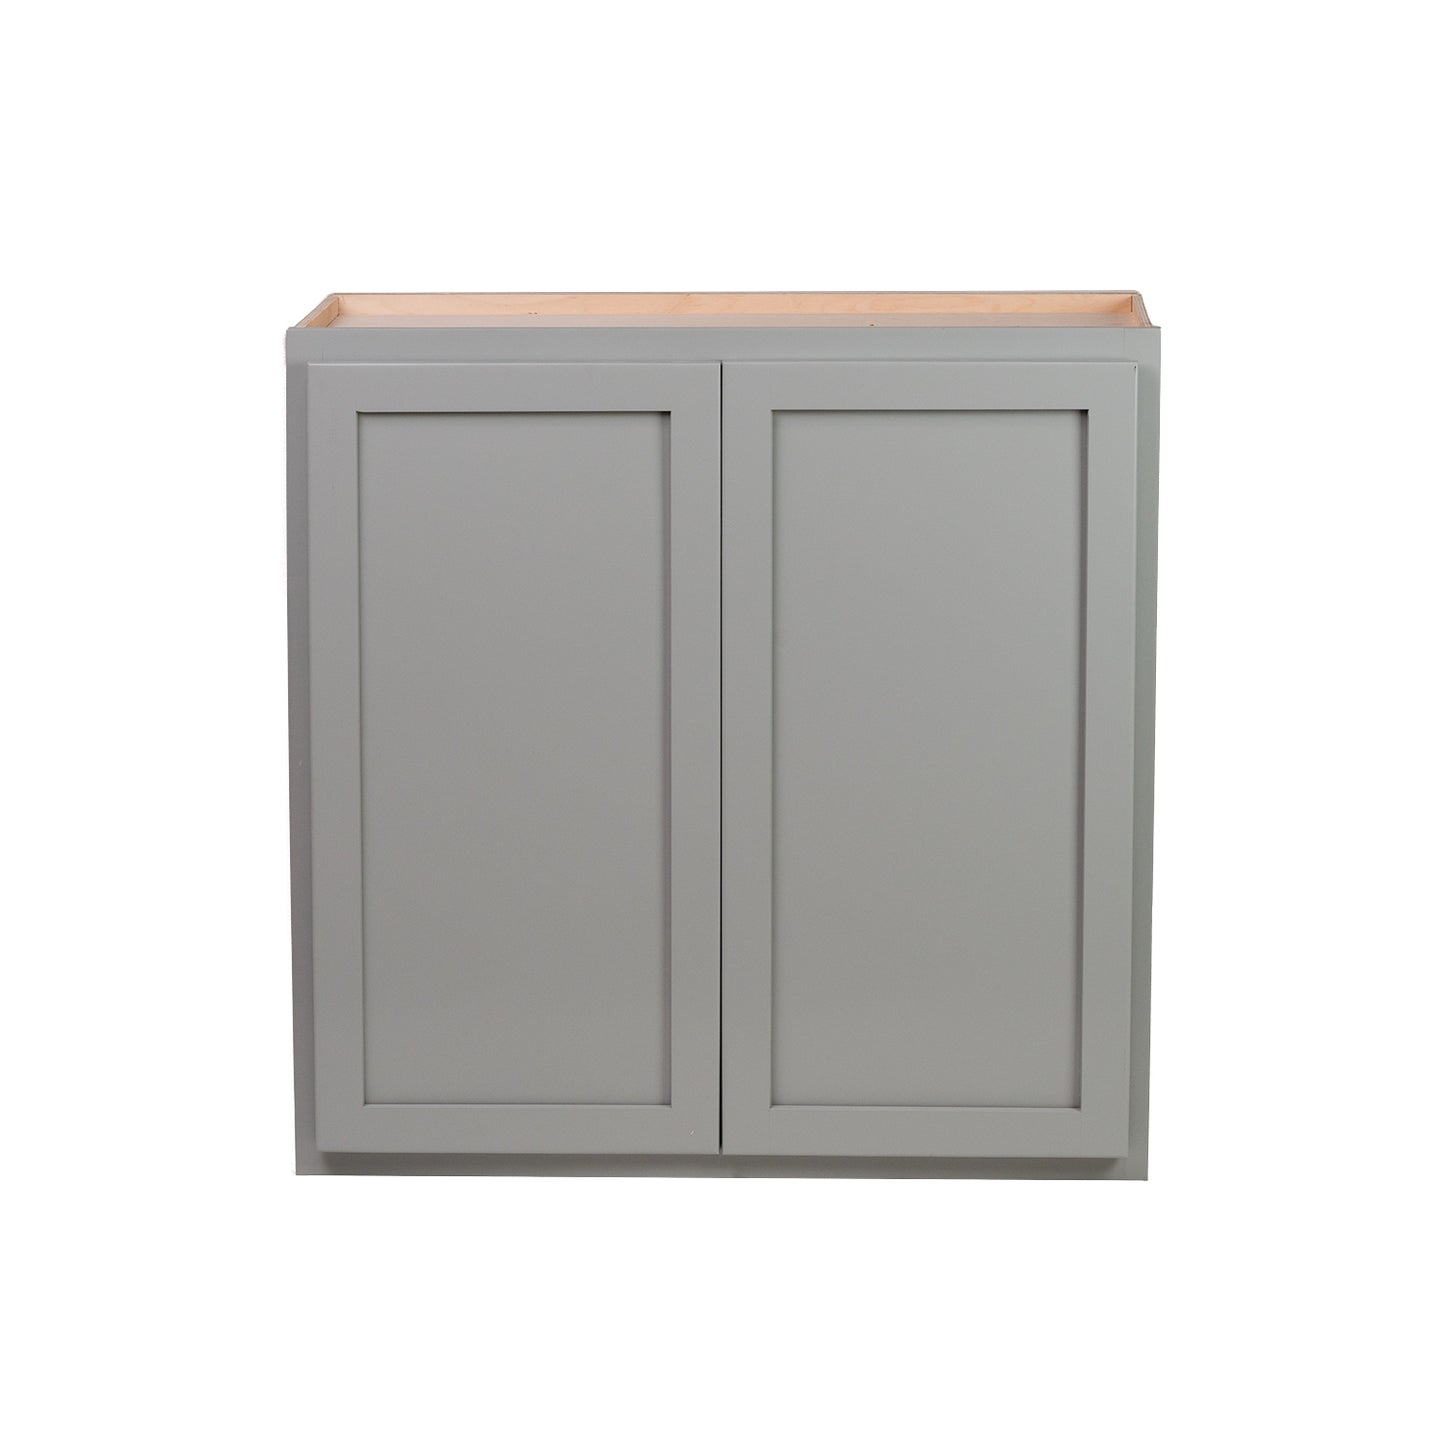 Quicklock RTA (Ready-to-Assemble) Magnetic Gray Wall Cabinet- Double Door 30"H x (30", 36"W)